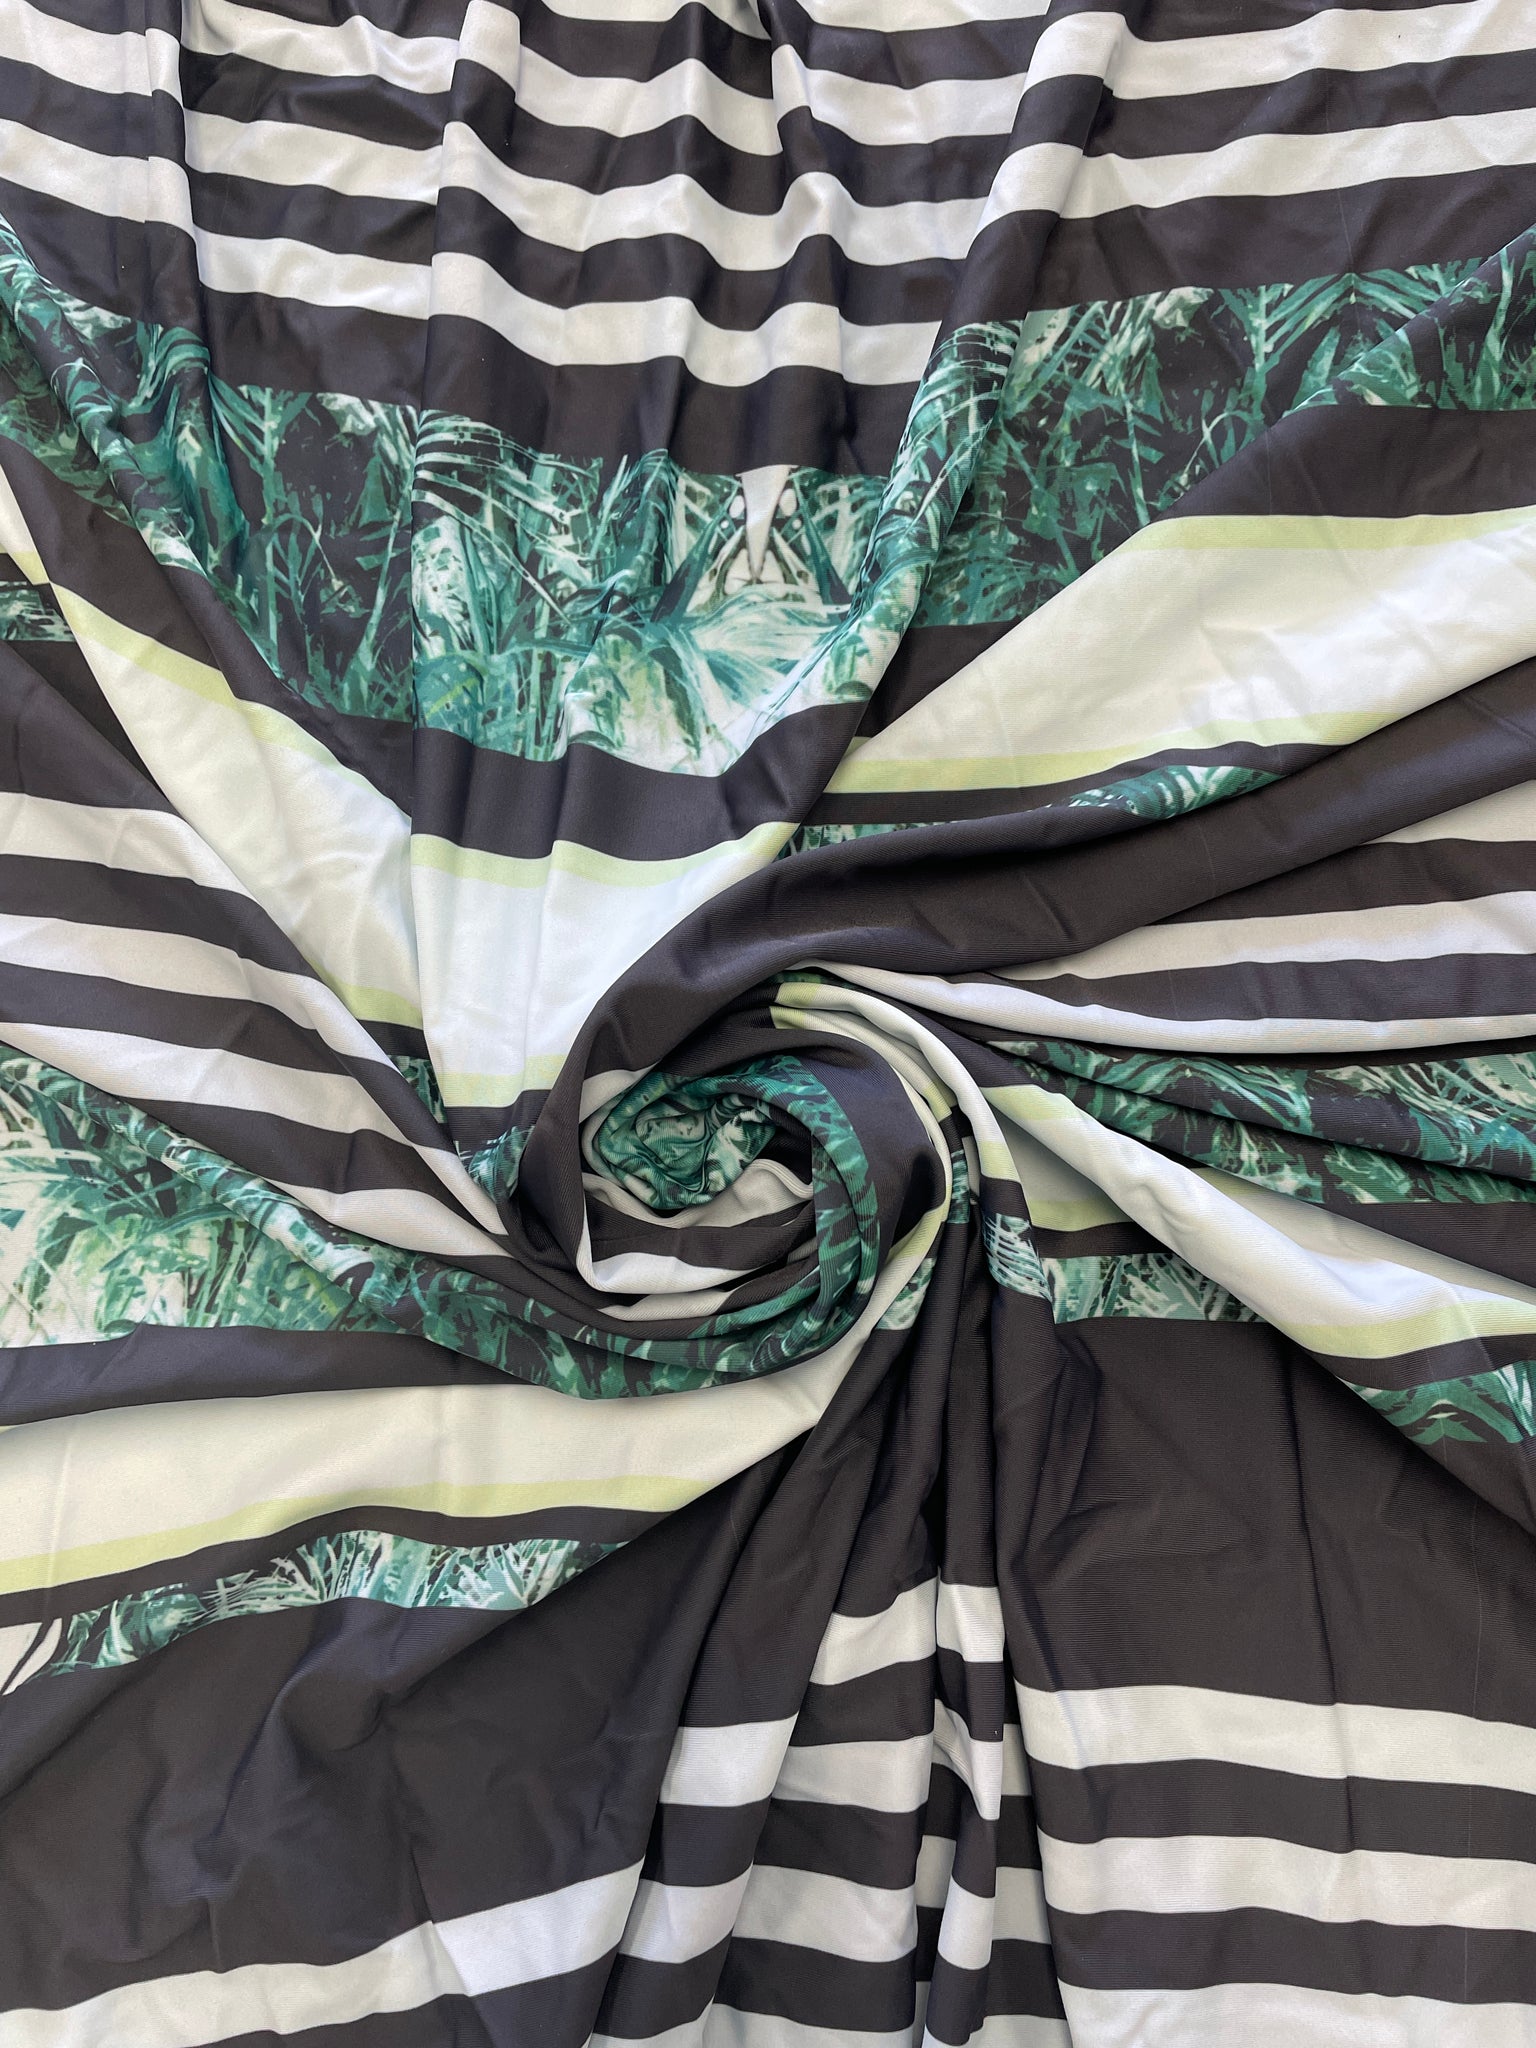 Polyester Printed Spandex - Black, Pale Gray and Palm Leaves